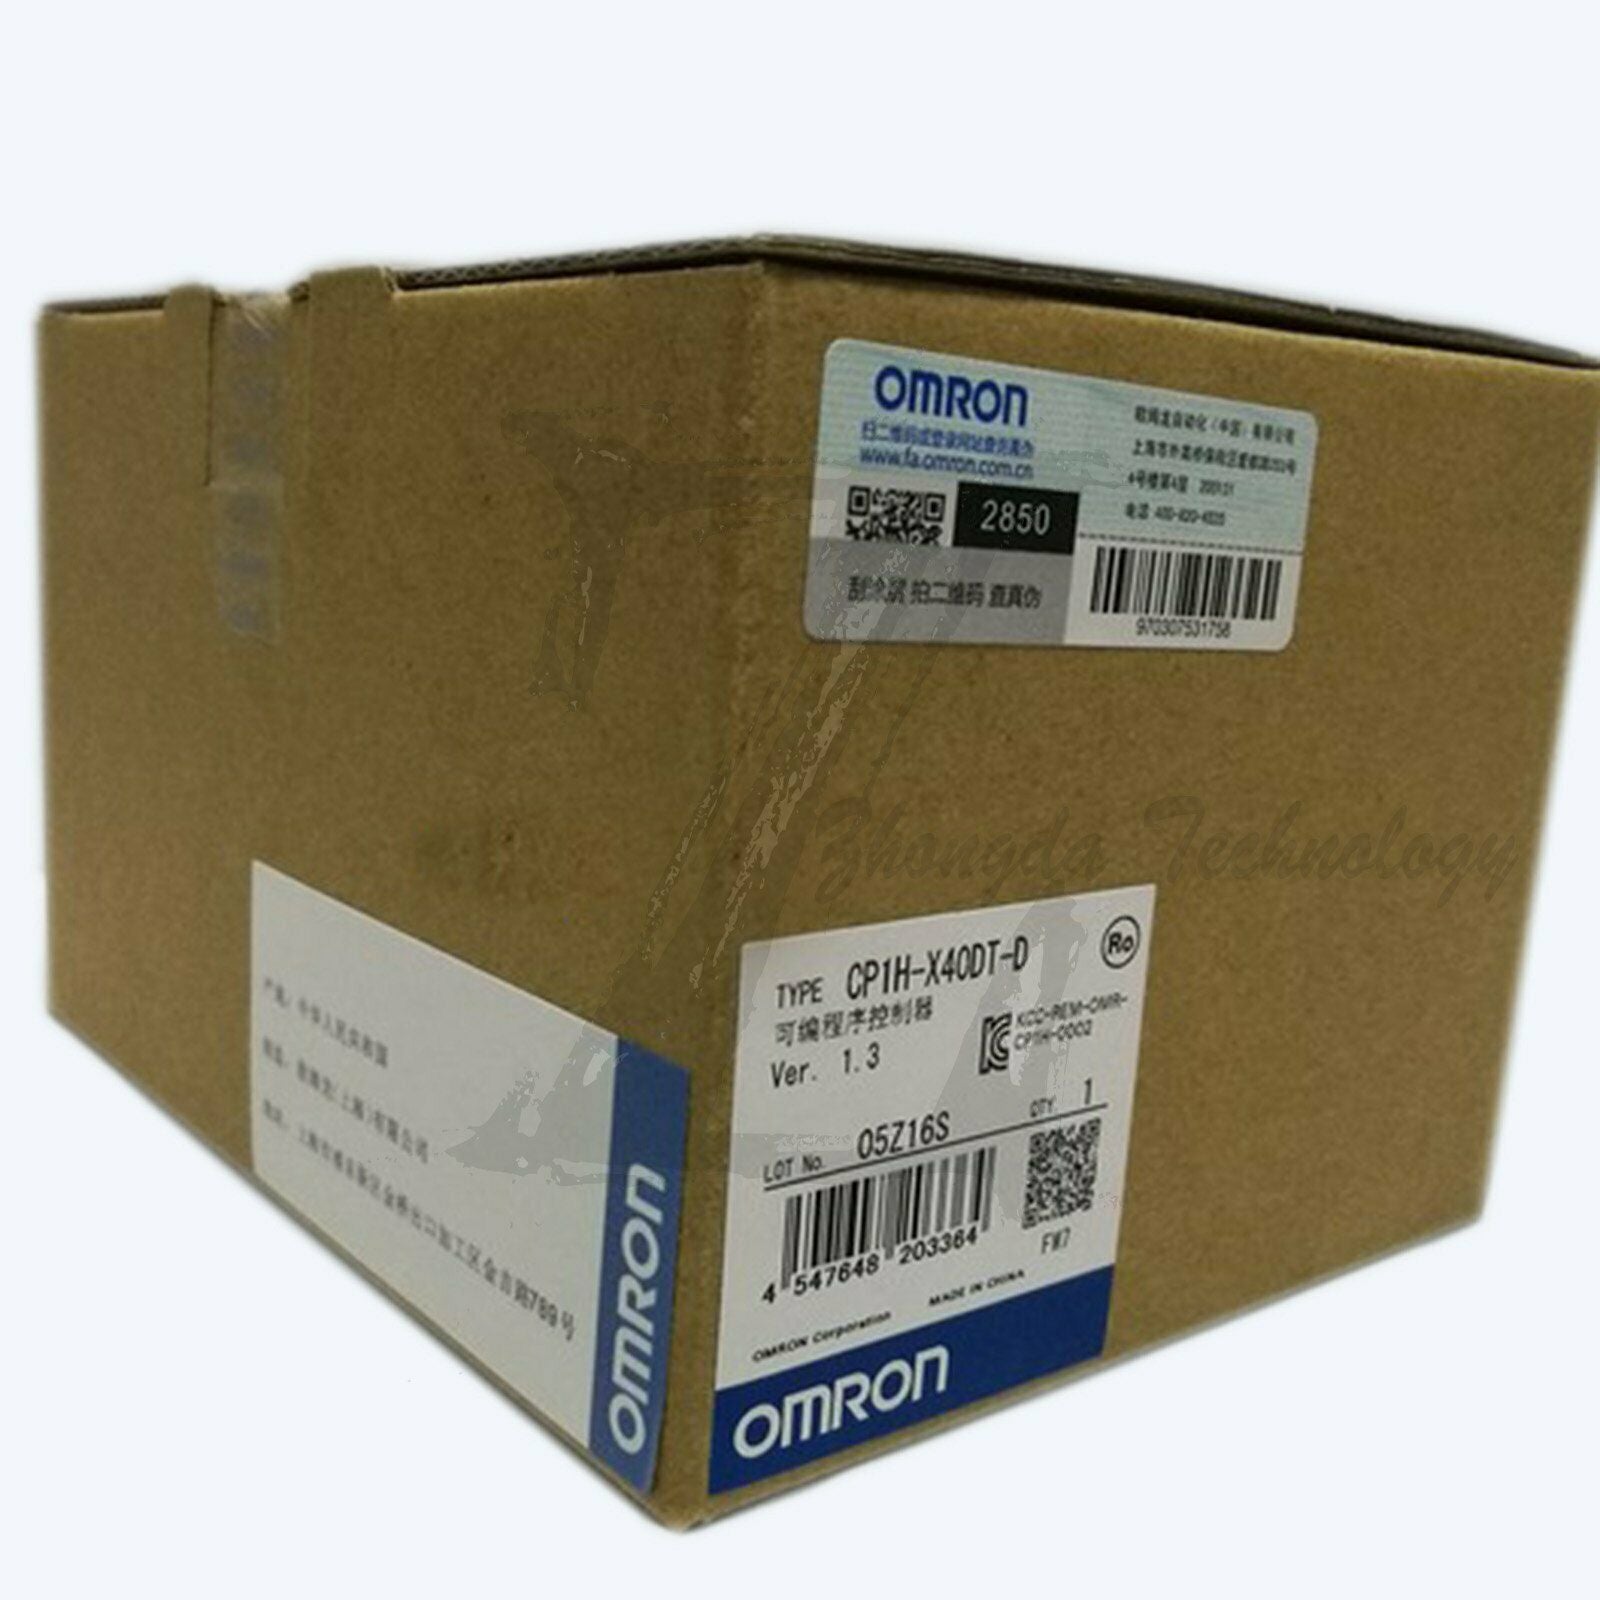 1pc new Omron programmable controller CP1H-X40DT-D one year warranty KOEED 201-500, 80%, import_2020_10_10_031751, Omron, Other